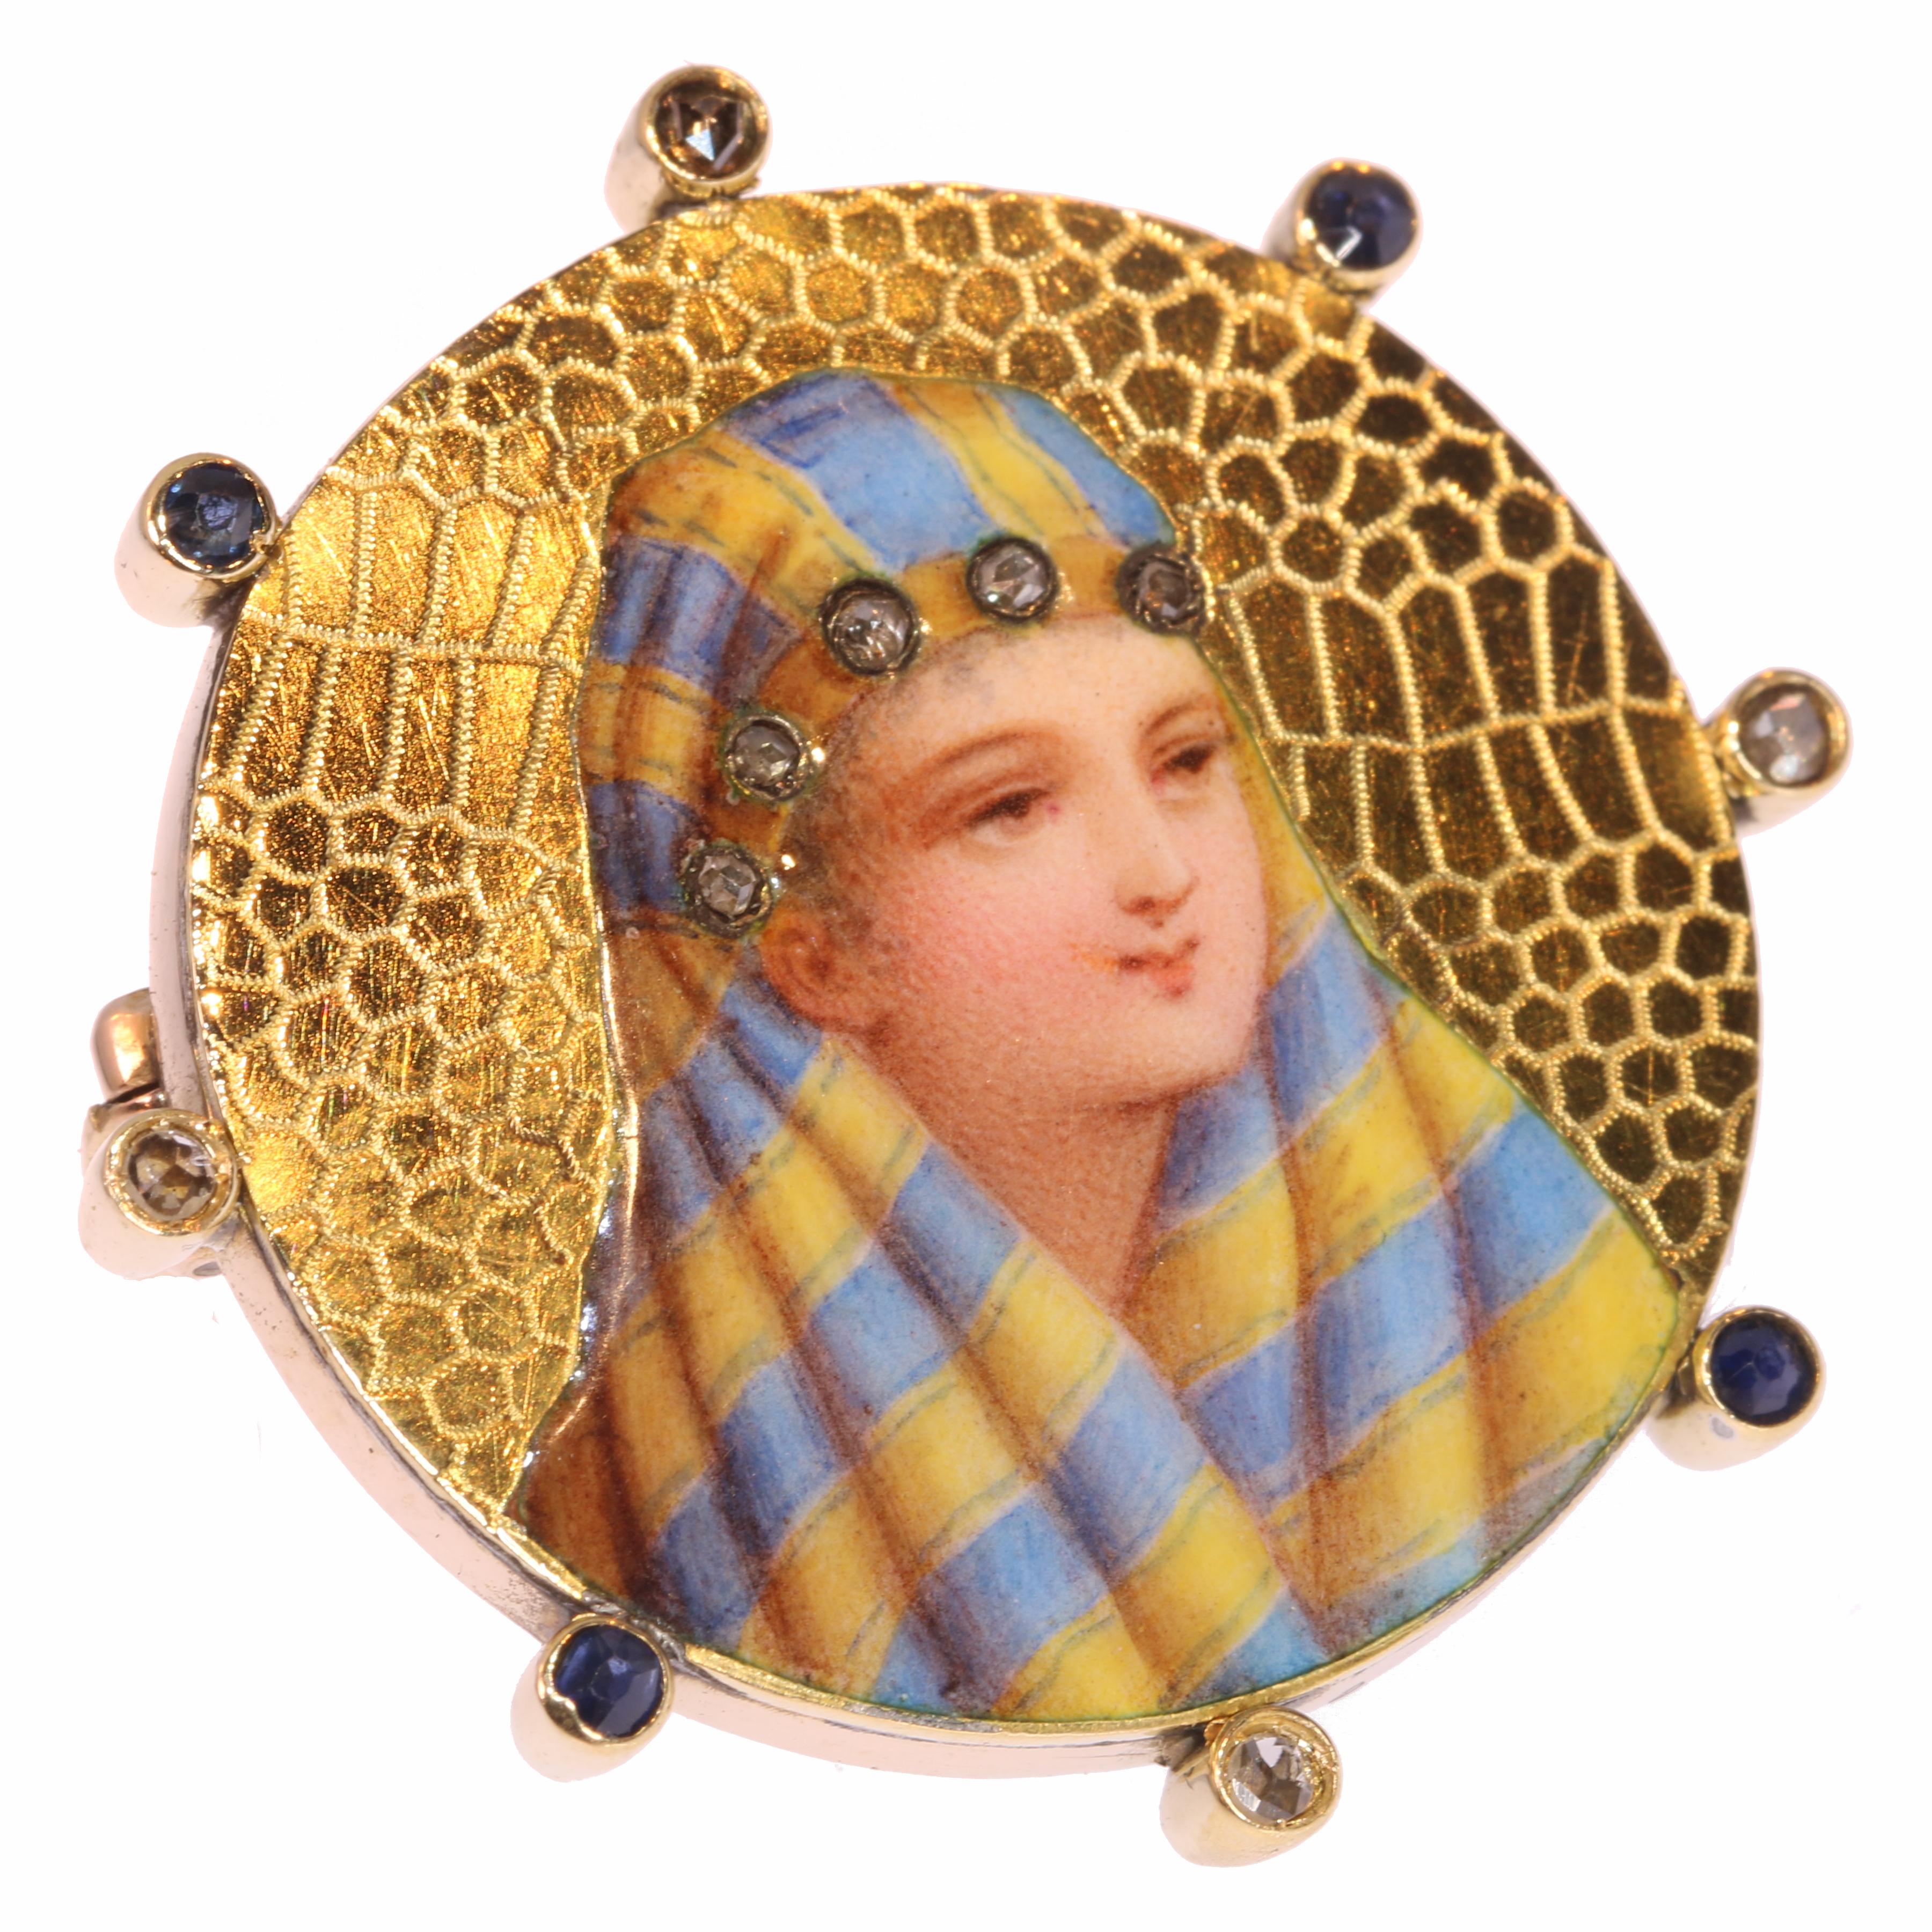 Antique jewelry object group: brooch

Condition: very good condition

Do you wish for a 360° view of this unique jewel?
Just send us your request and we’ll give you the direct link to the videoclip showing this treasure’s full splendour as no